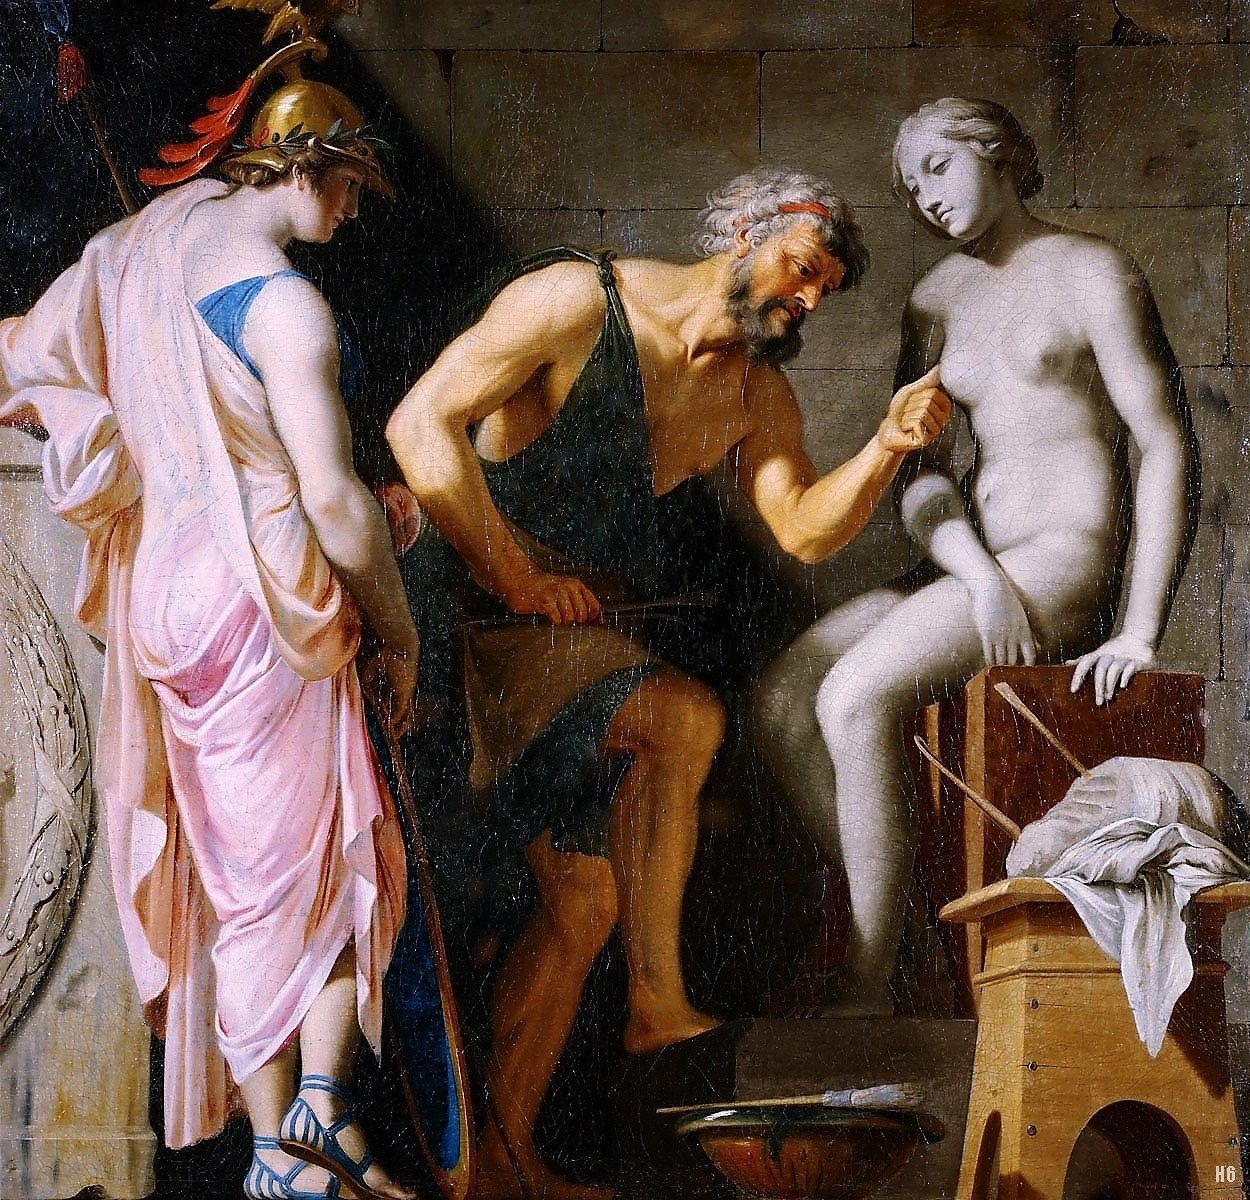 Allegory of Sculpture - Pygmalion and Galatea. 16th.century. Jacques Stella. French 1596-1657. oil/canvas.
http://hadrian6.tumblr.com